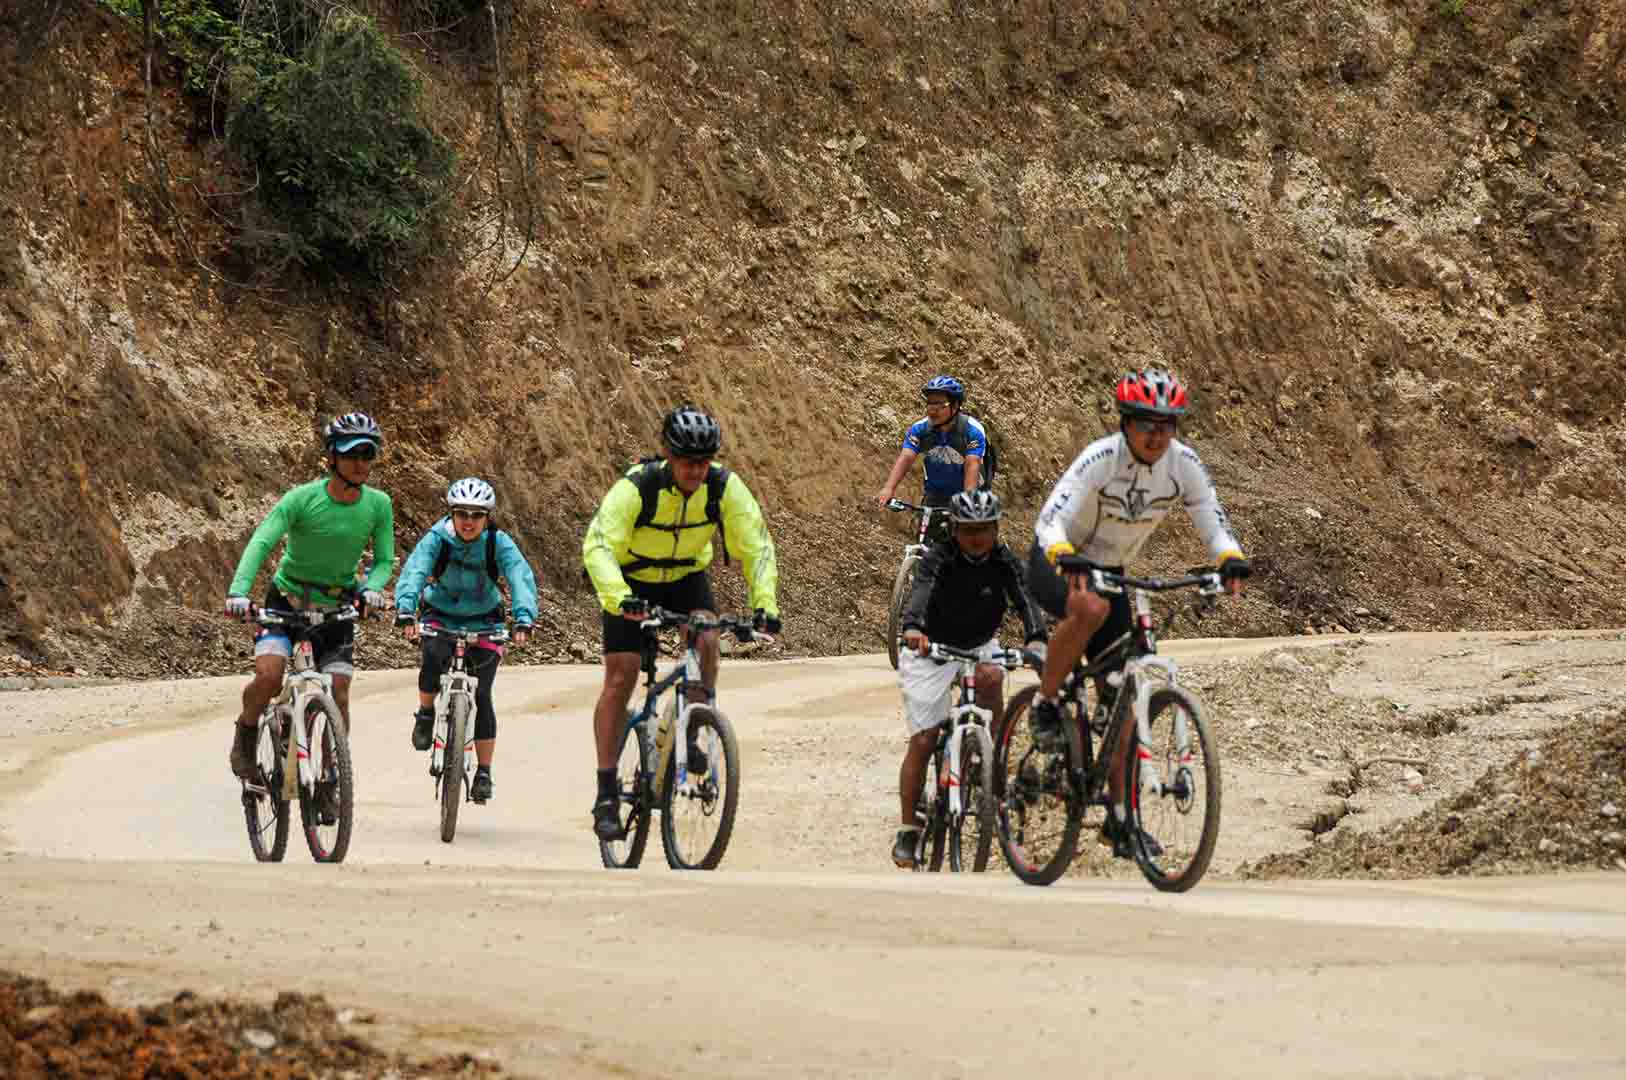 A cycle race in Bhutan, famously known as the Tour of the Dragon